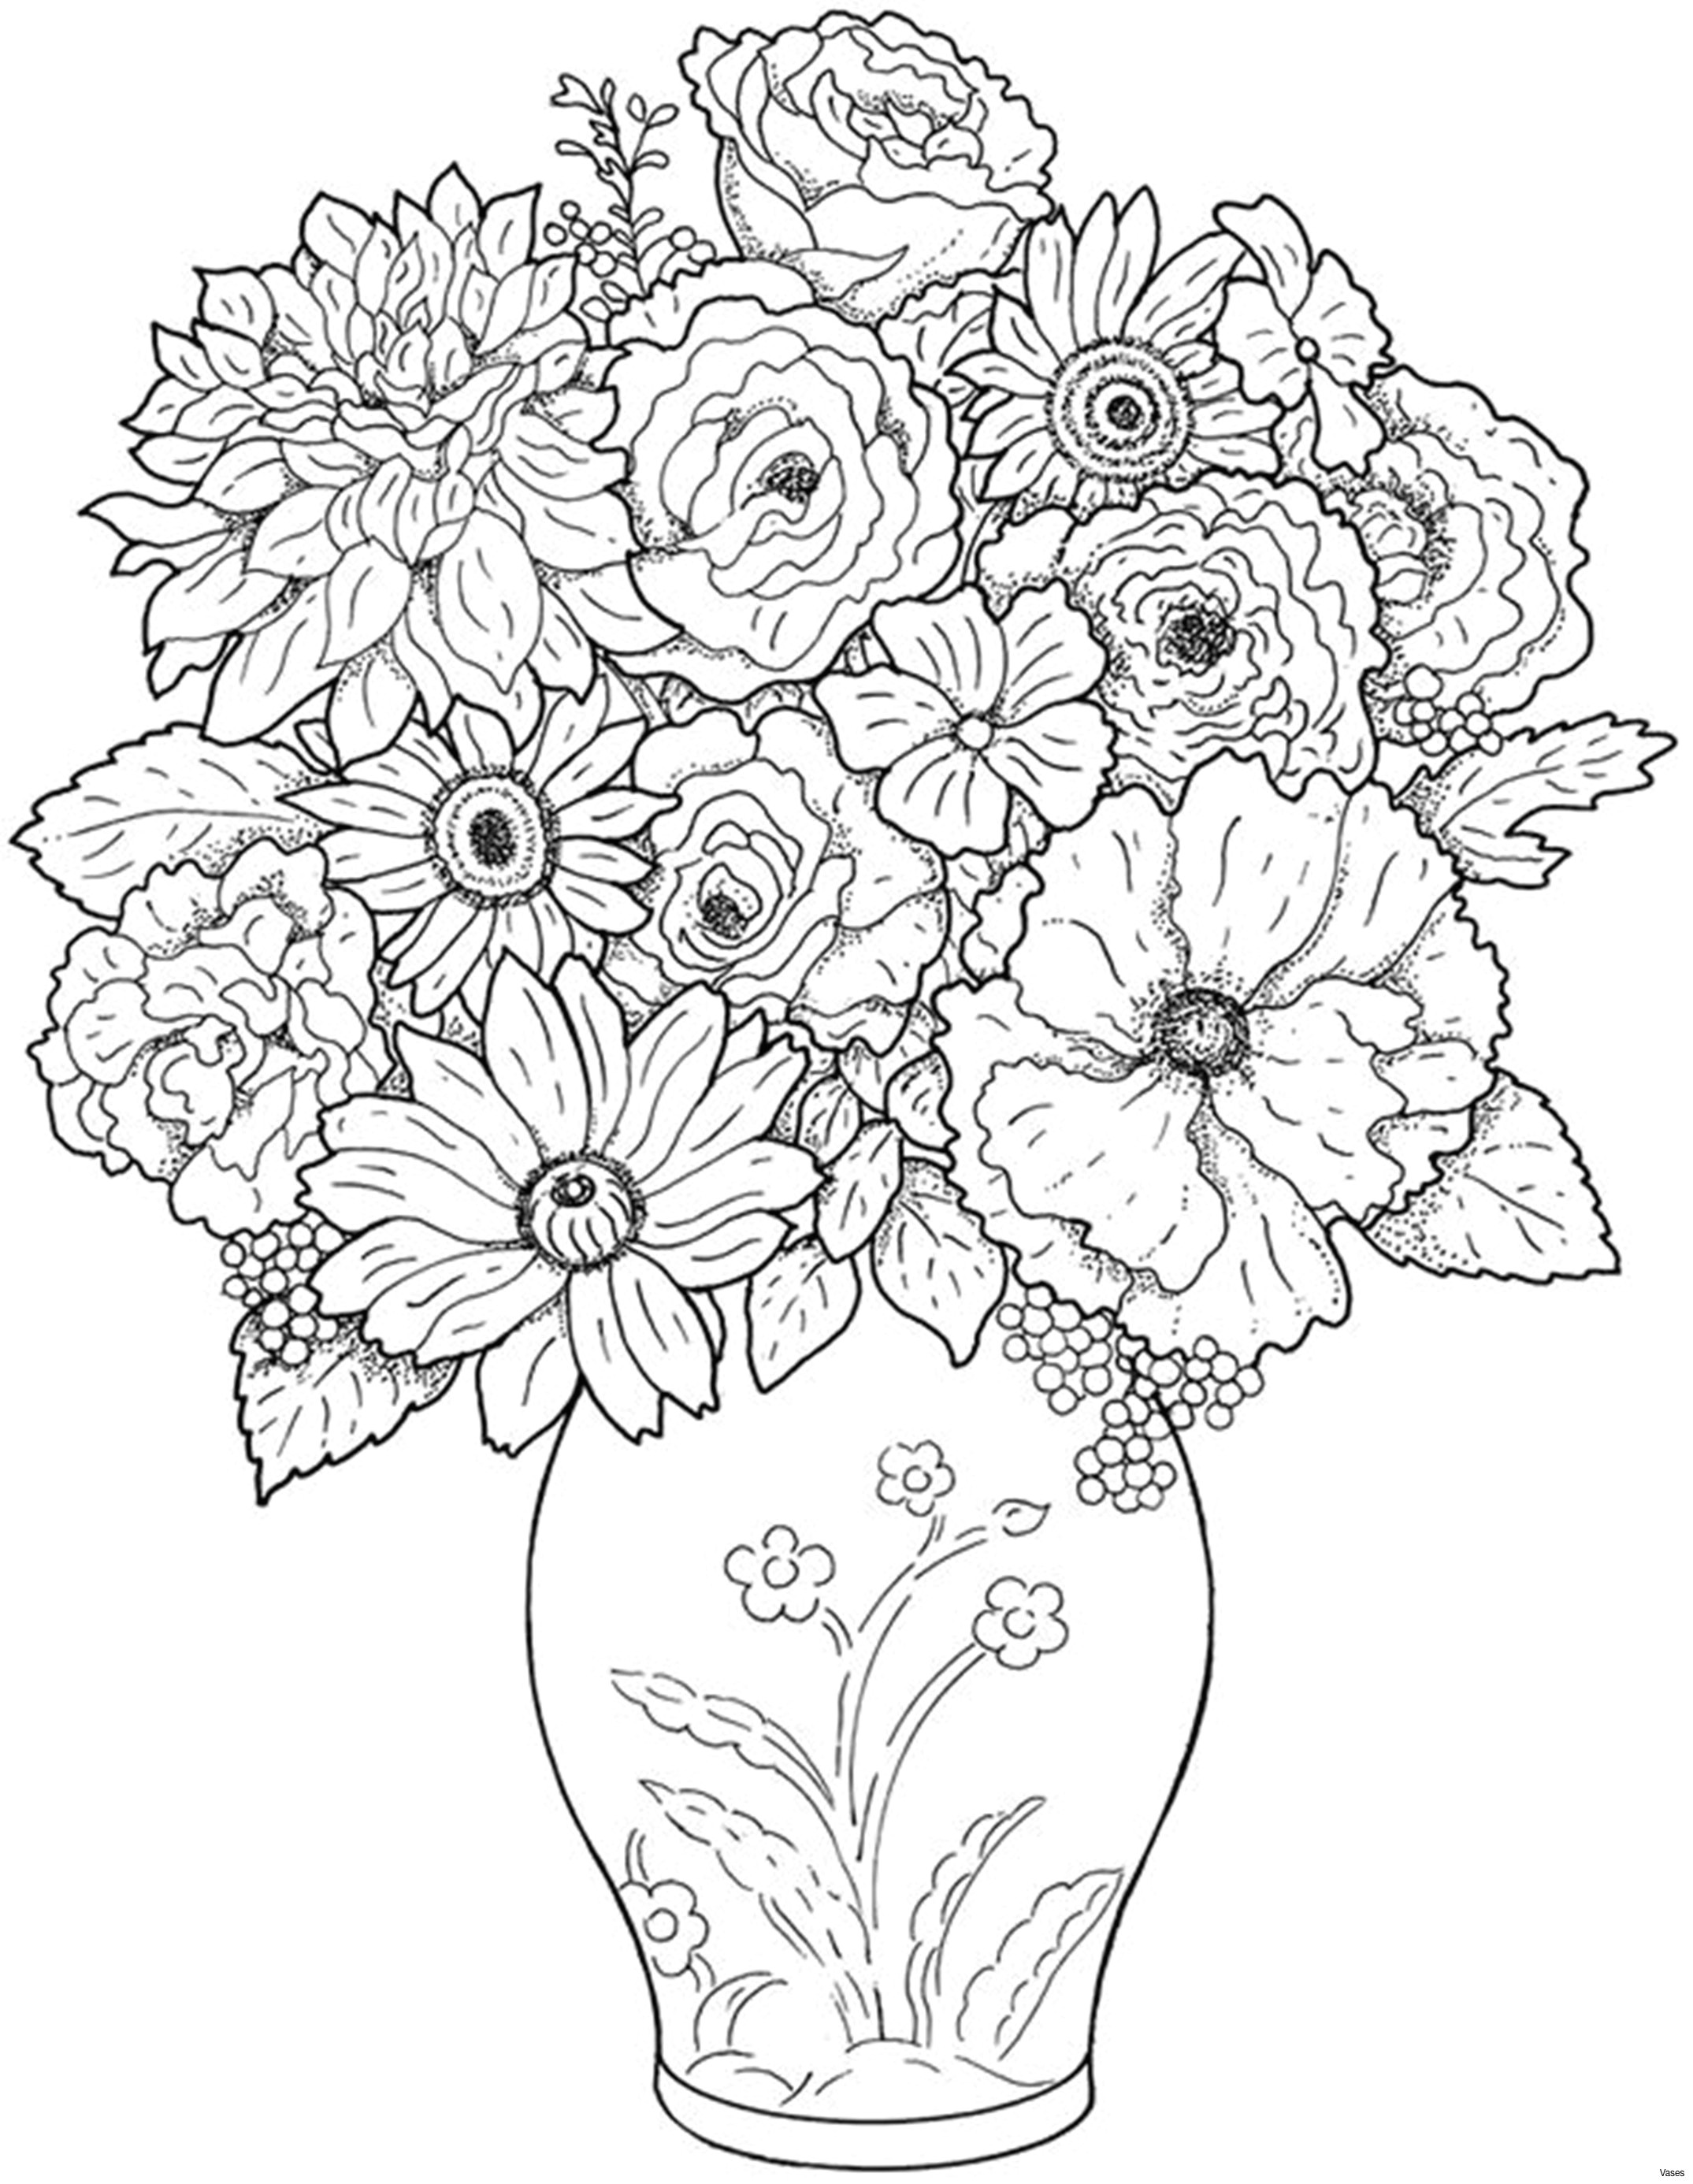 Drawings Of Flowers Coloured Www Colouring Pages Aua Ergewohnliche Cool Vases Flower Vase Coloring